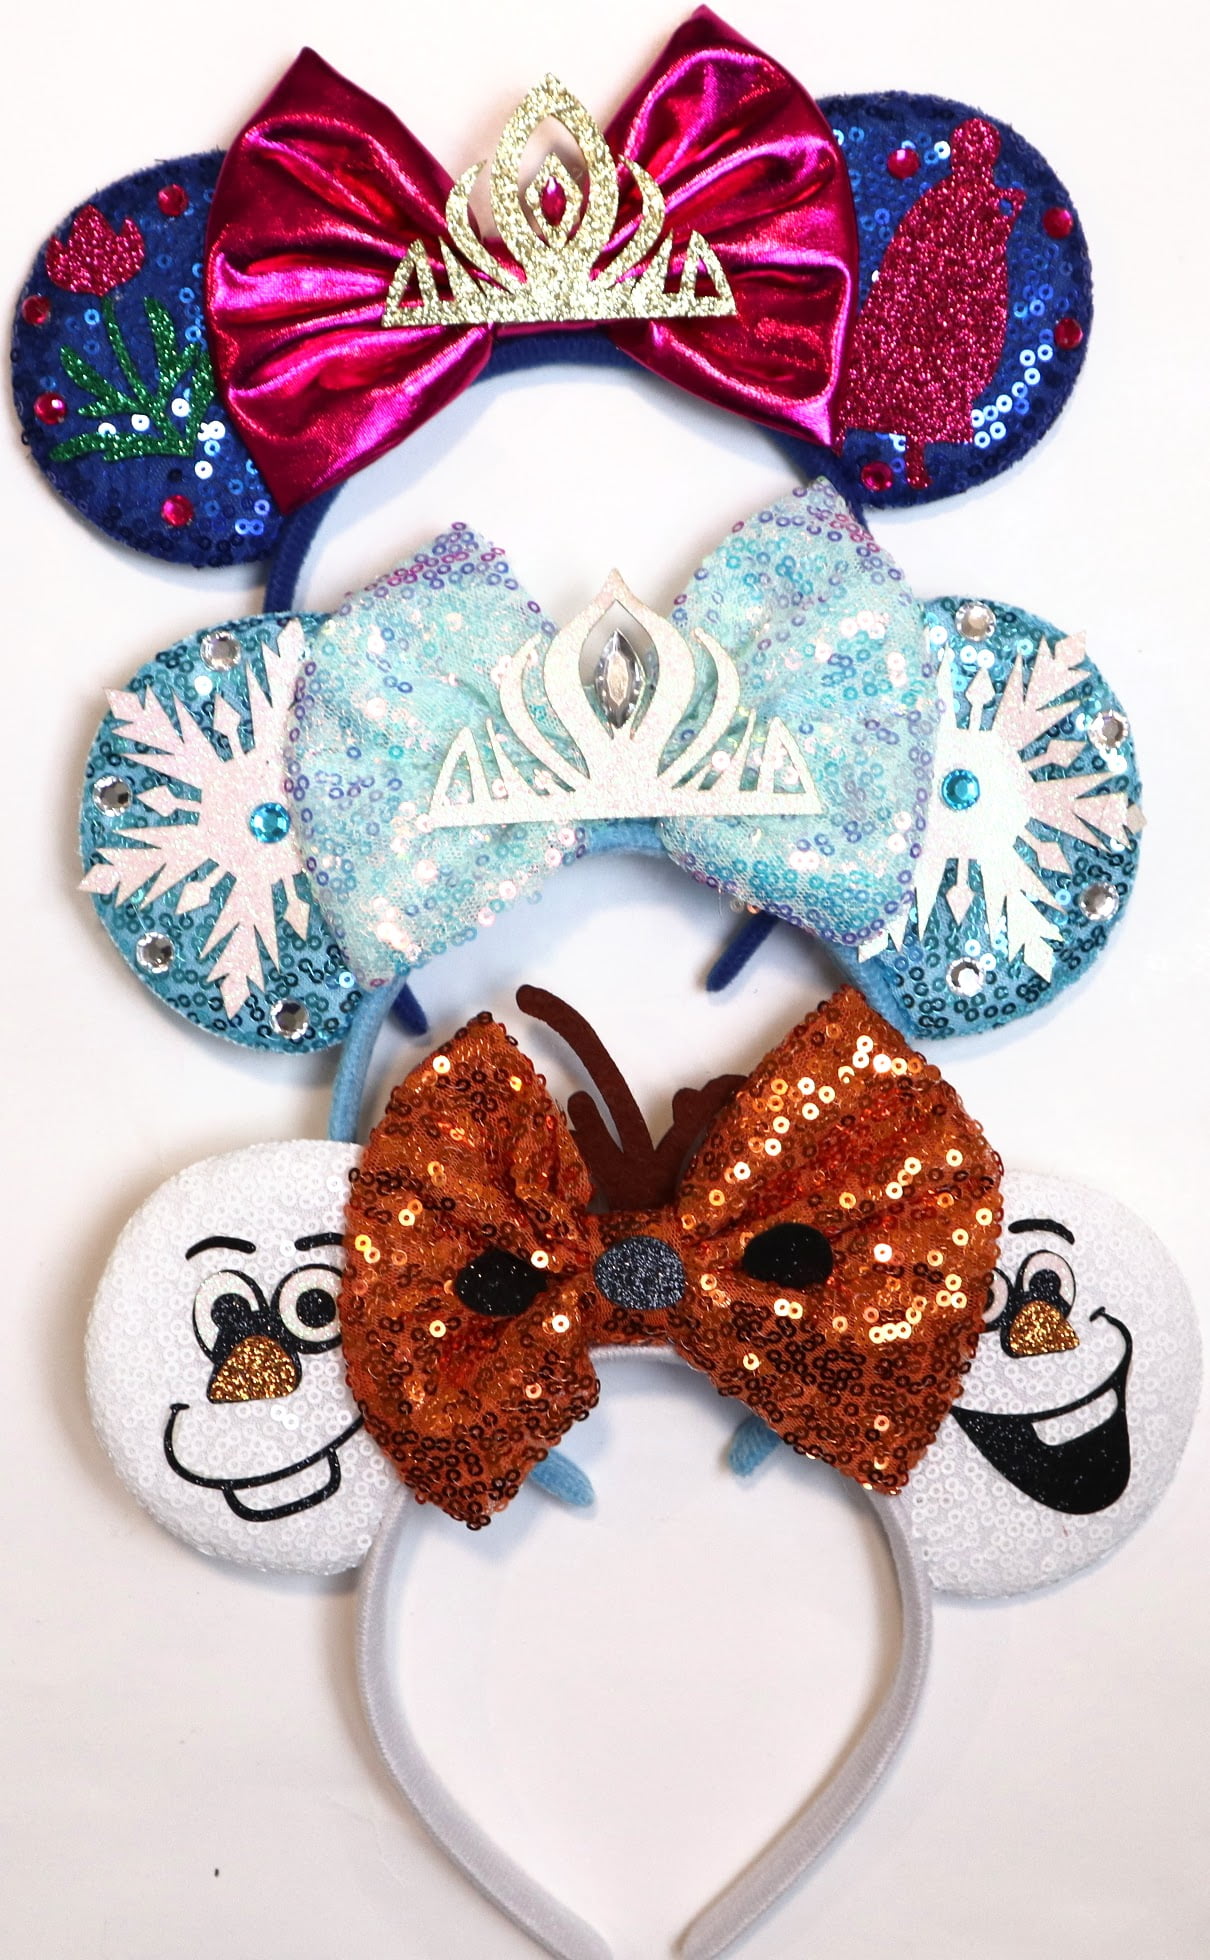 Character Ribbons - Frozen, Minnie Mouse, Disney Princess & more!